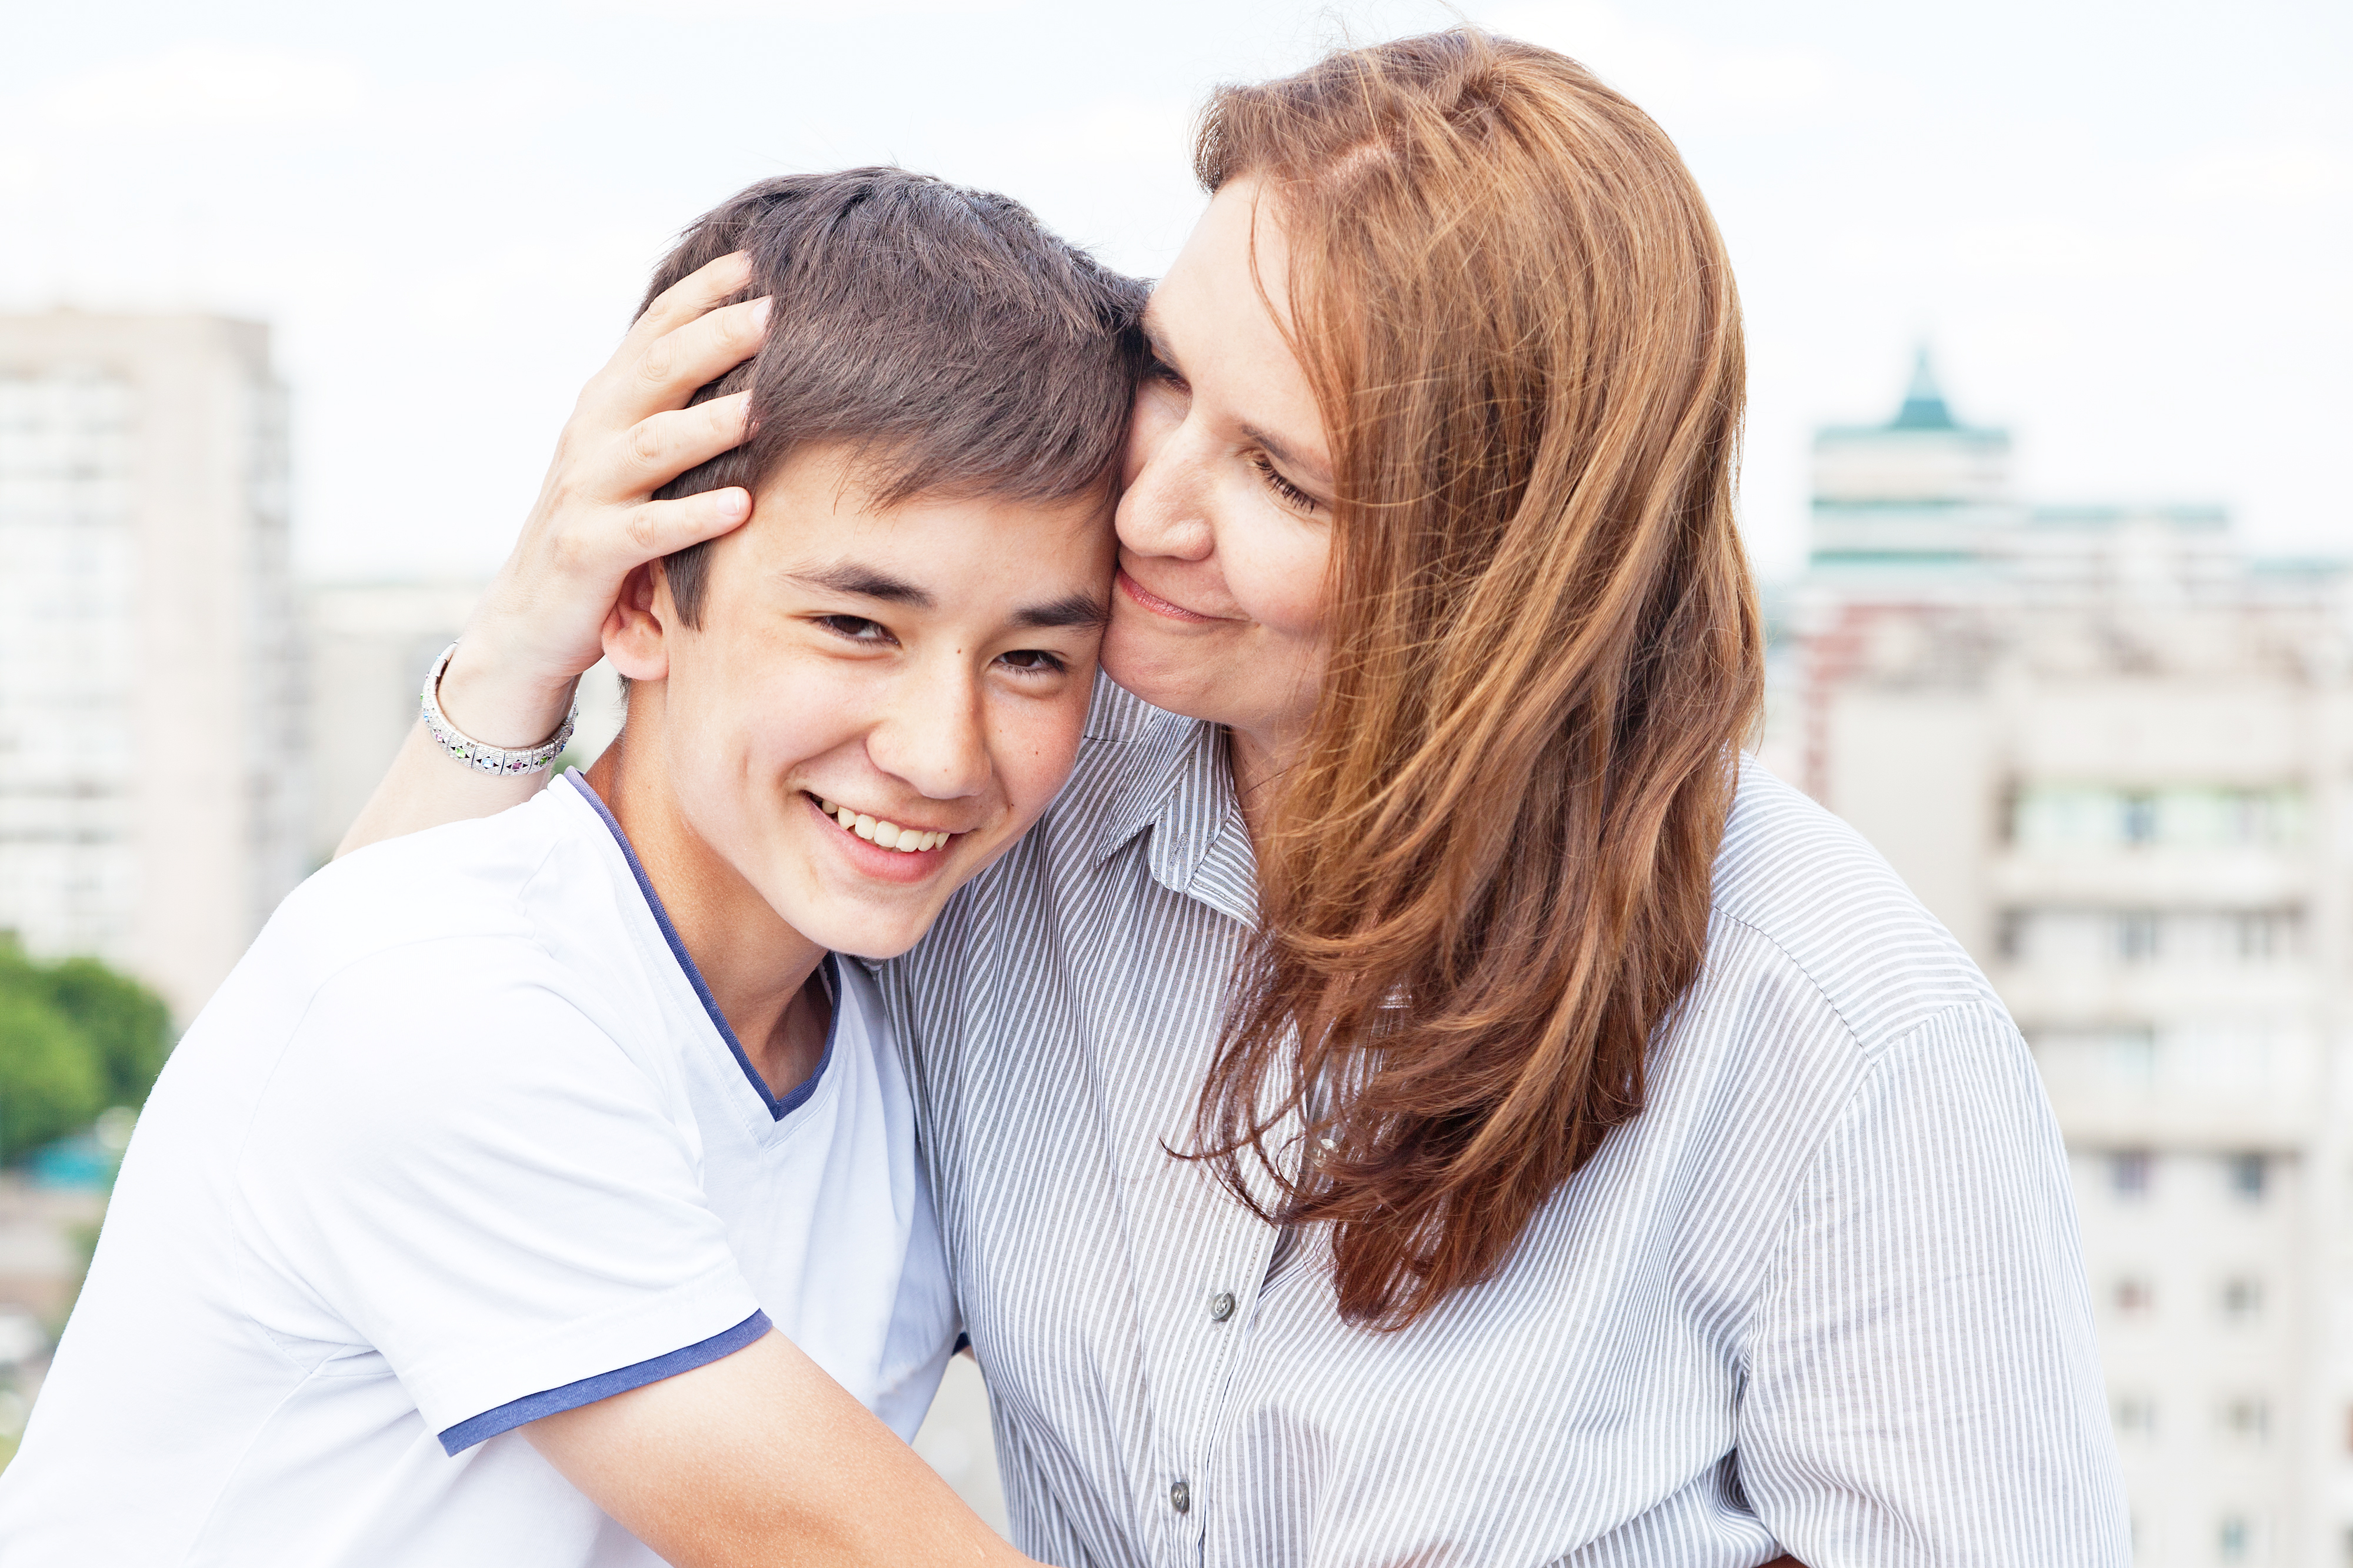 Mom happy with son | Shutterstock